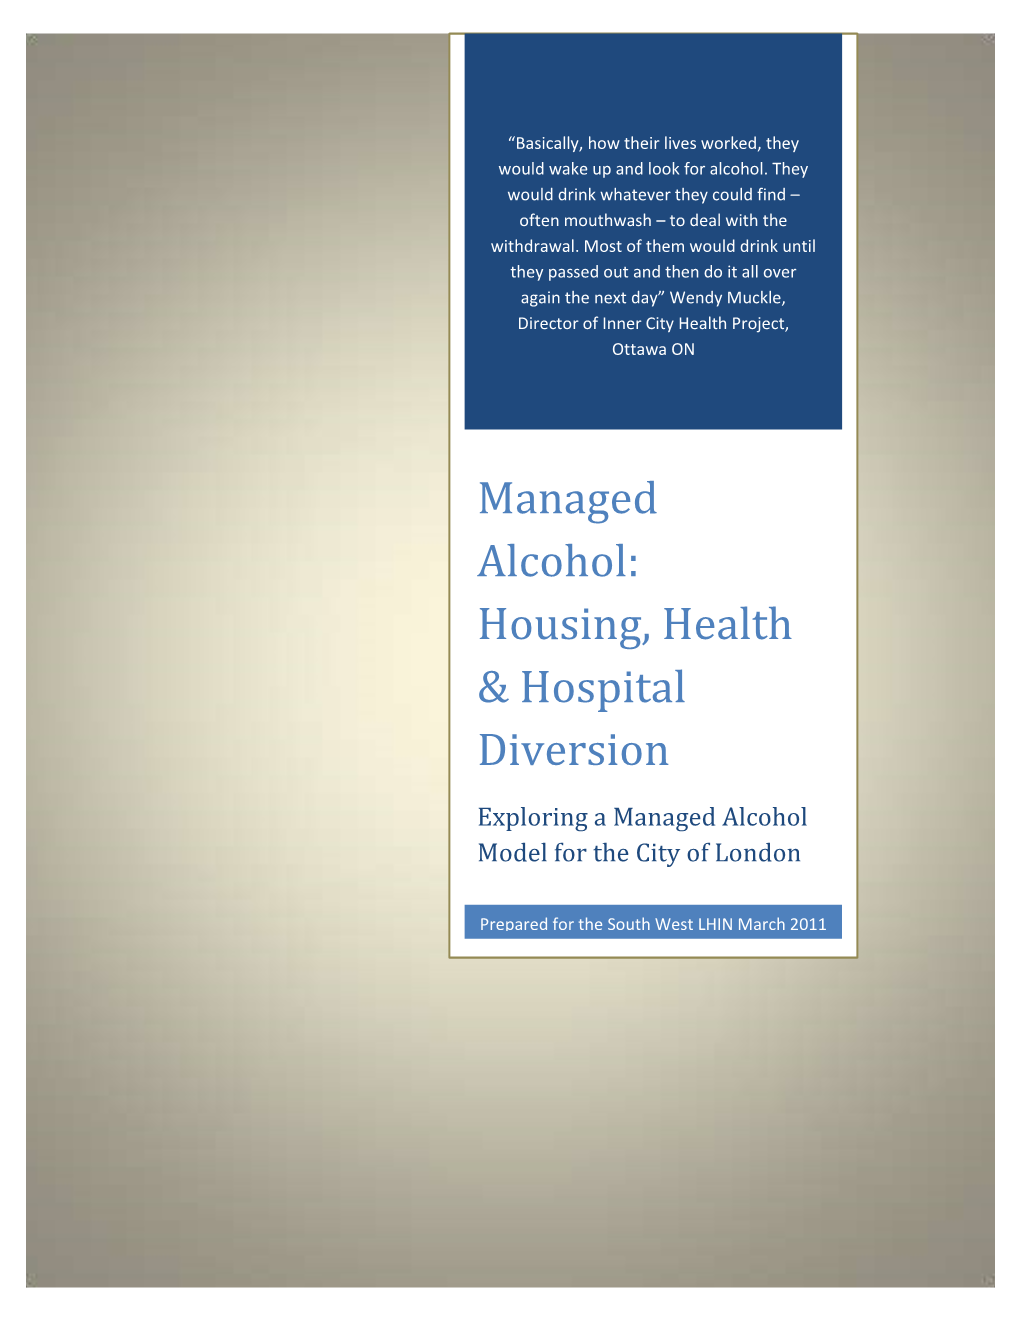 Managed Alcohol: Housing, Health